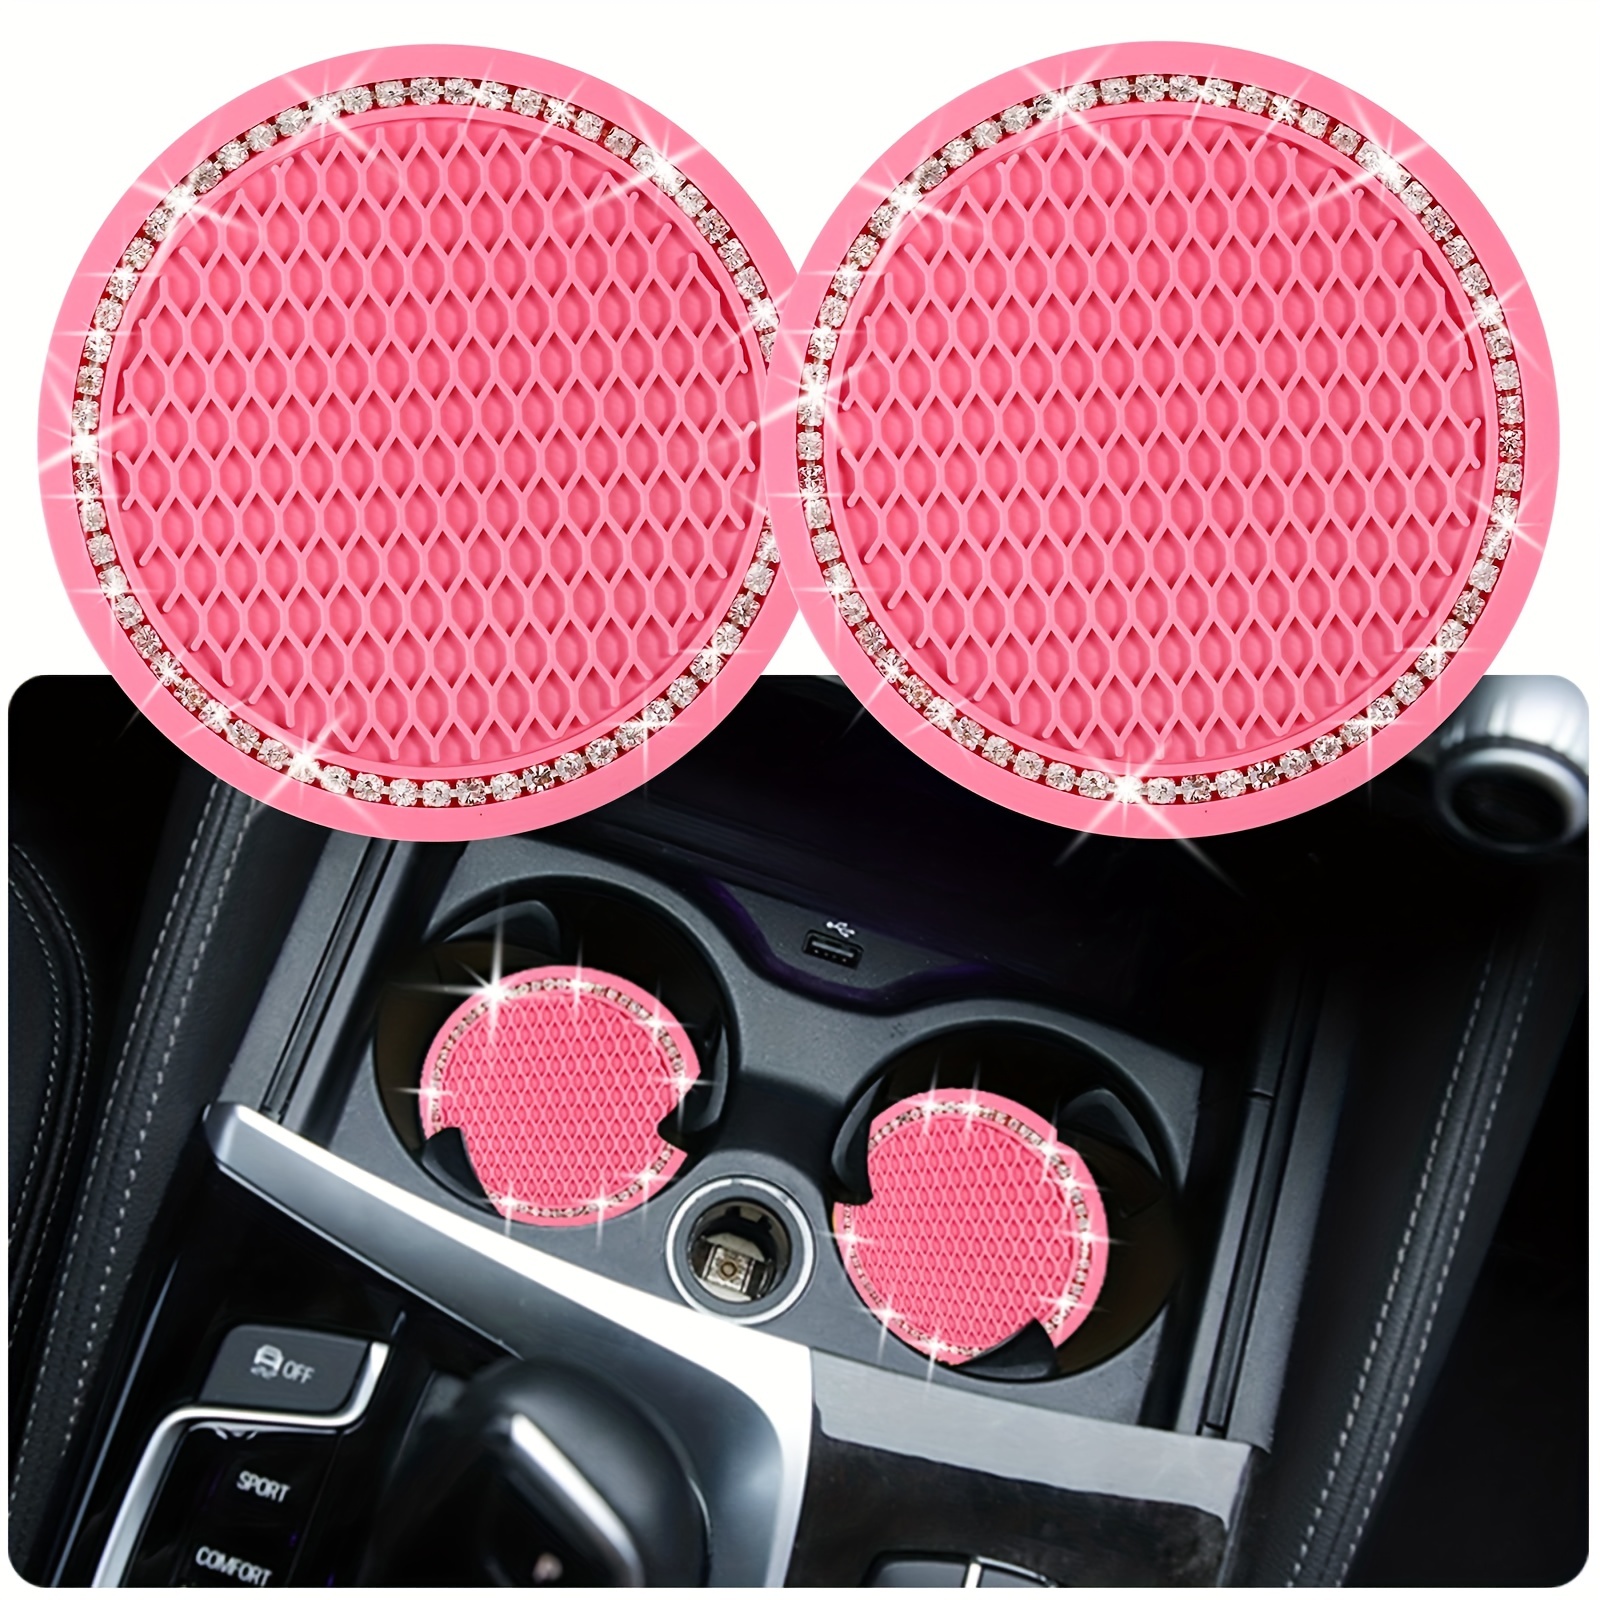  Car Coasters for Cup Holders, 2.75 Inch Auto Cup Holder Insert  Coasters Silicone Anti-Slip Crystal Rhinestone Cute Drink Car Cup Mat, 4PCS  Bling Car Accessories for Women & Lady (Black) 